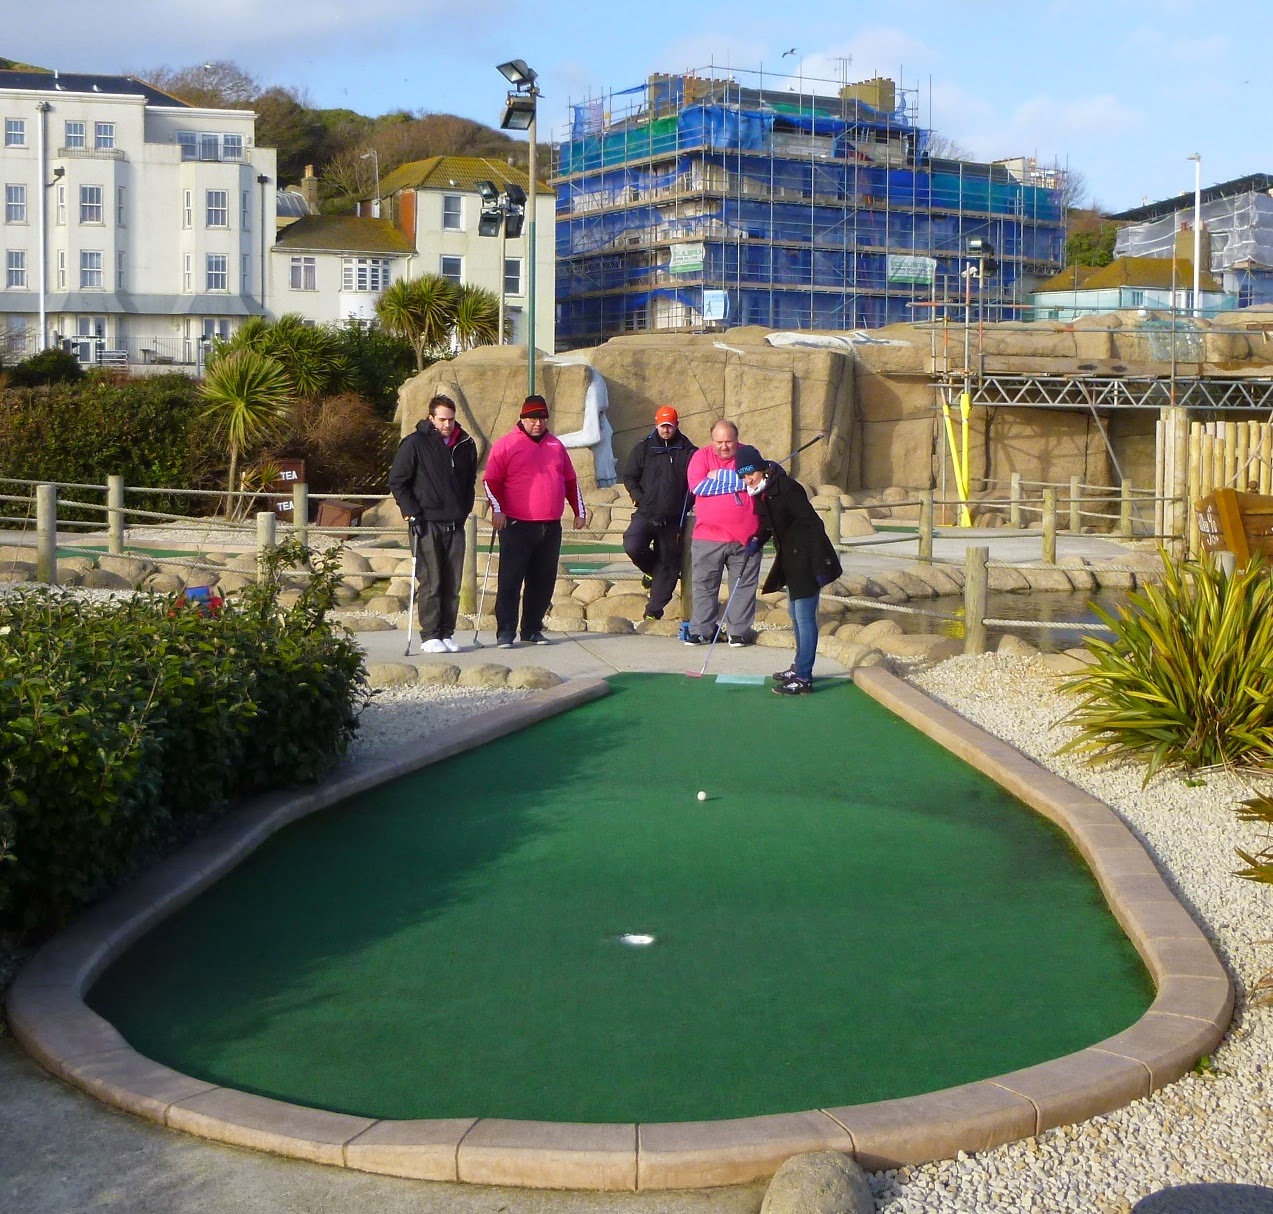 Emily Gottfried playing the 6th hole of the Pirate Golf course in Hastings during the sudden-death play-off against the Sussex Wasps